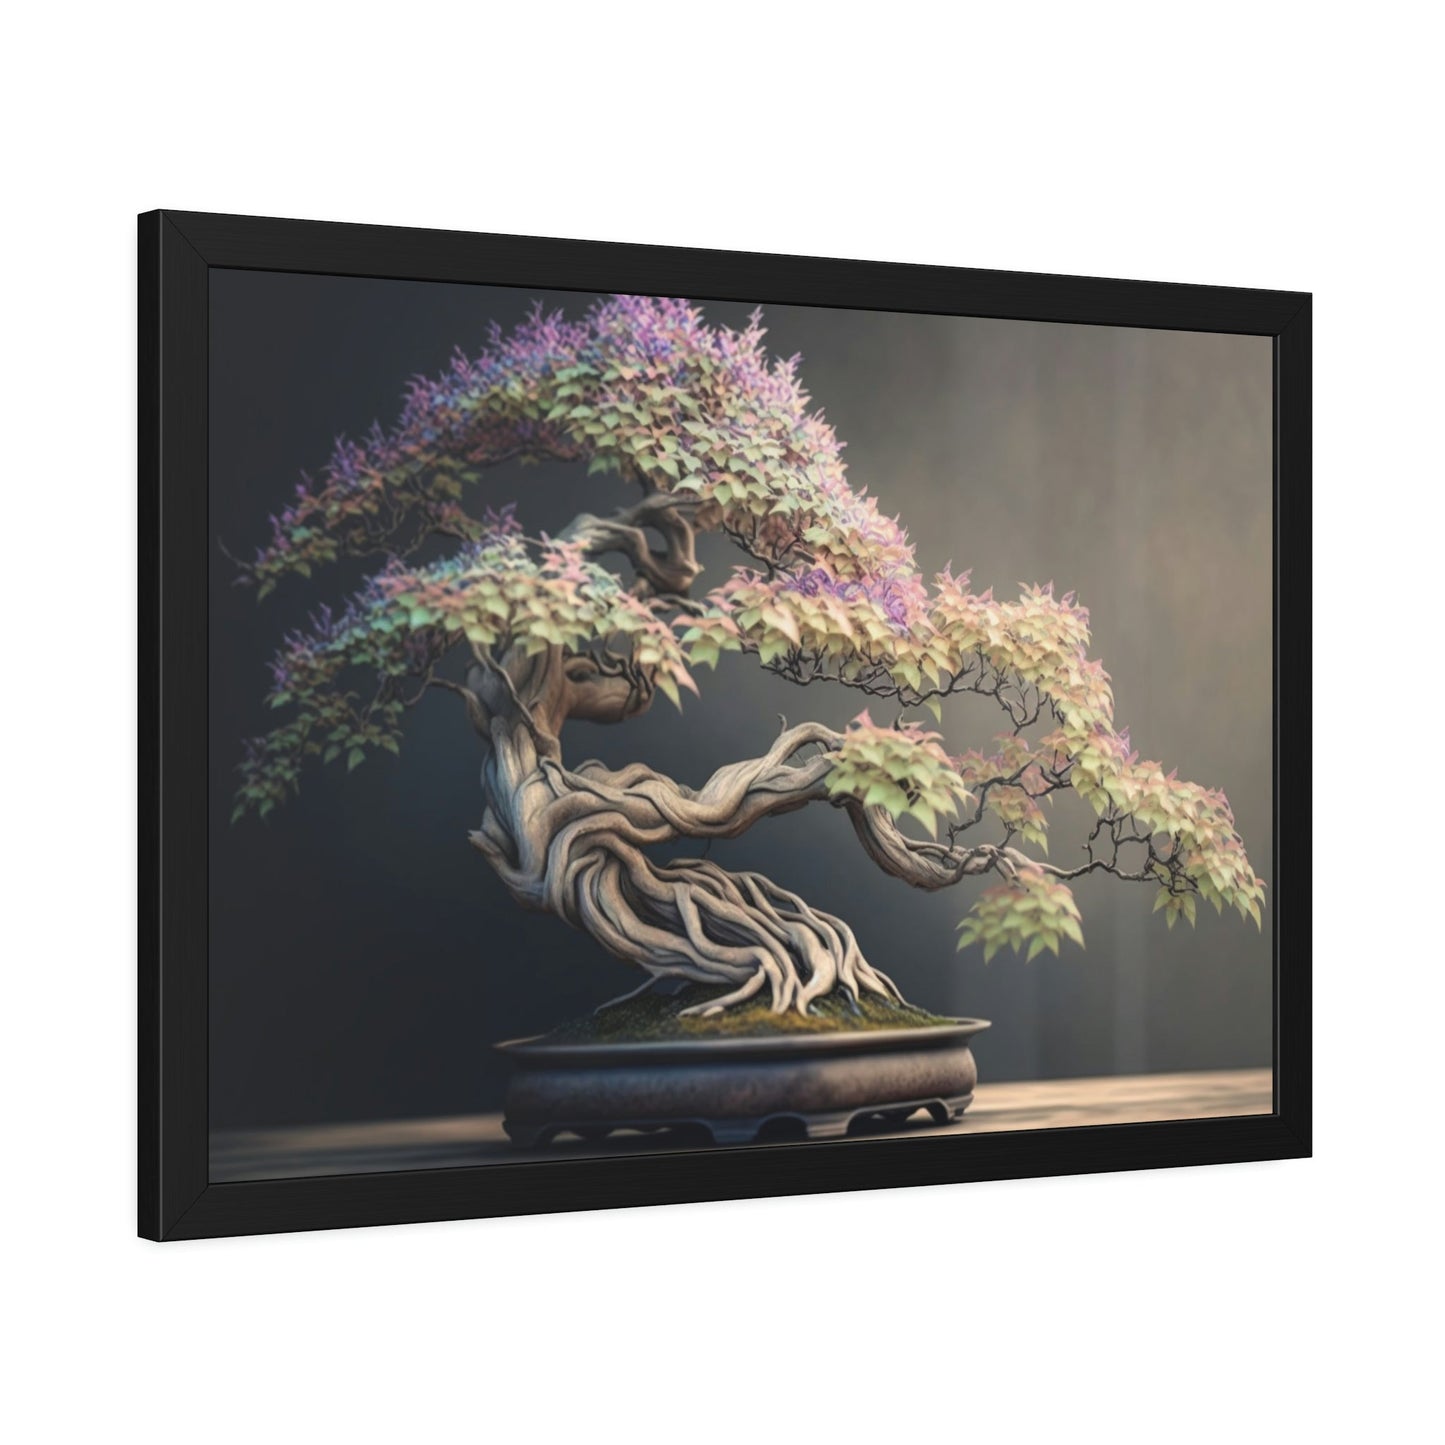 Bonsai Elegance: Wall Art and Print on Canvas with Sophisticated Bonsai Tree Art